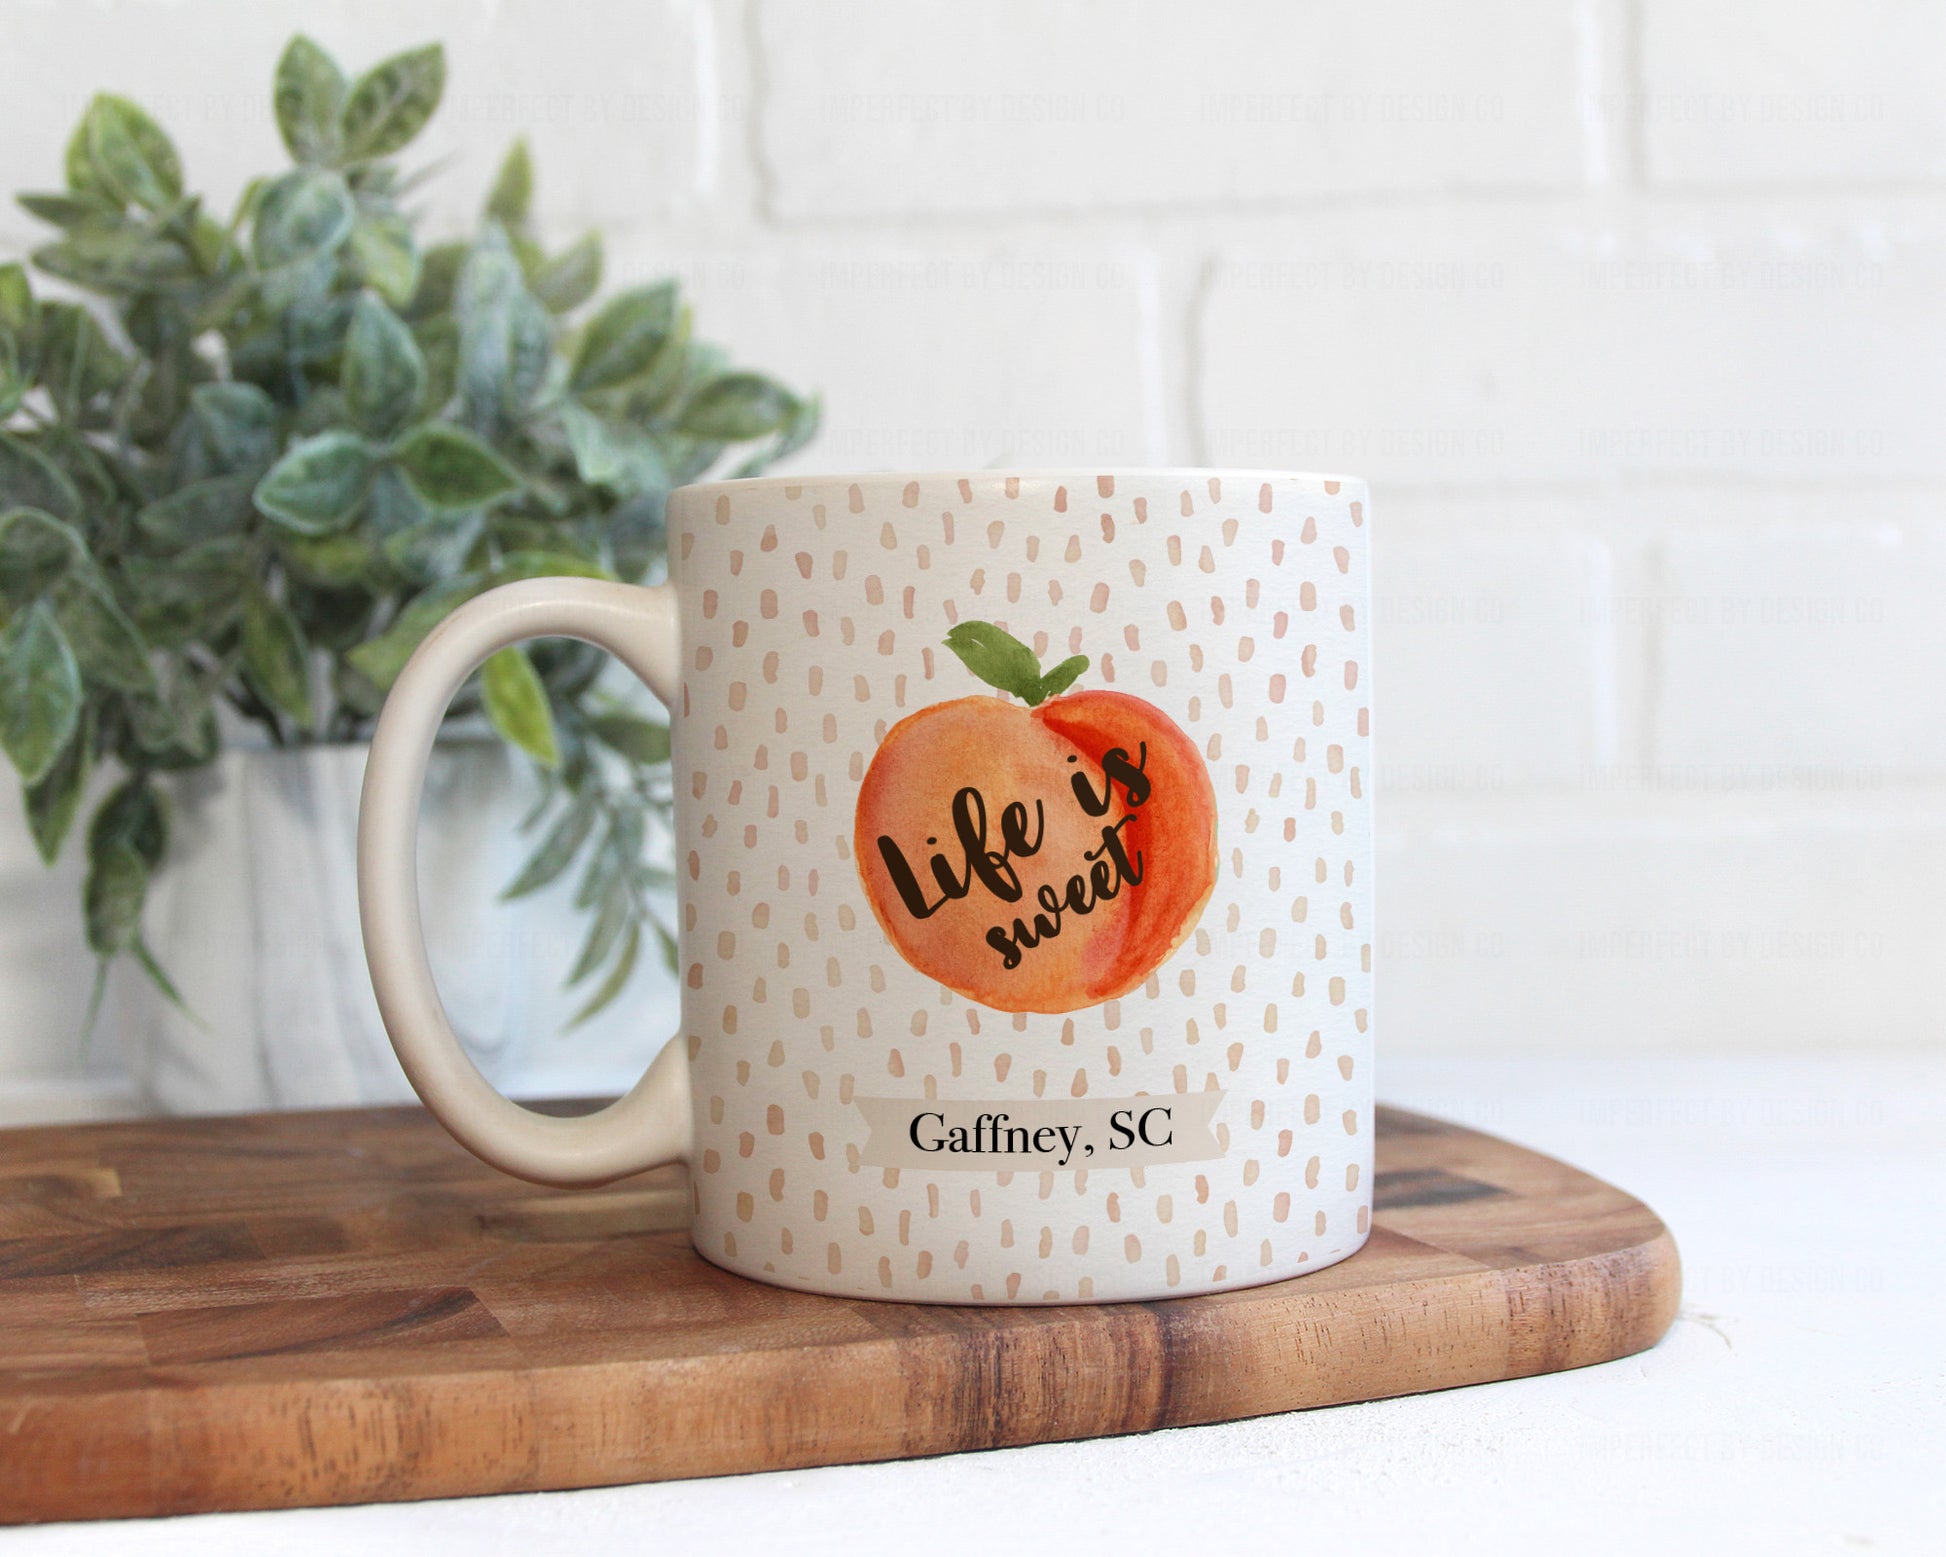 Ceramic coffee mug "Life is sweet" with city and state